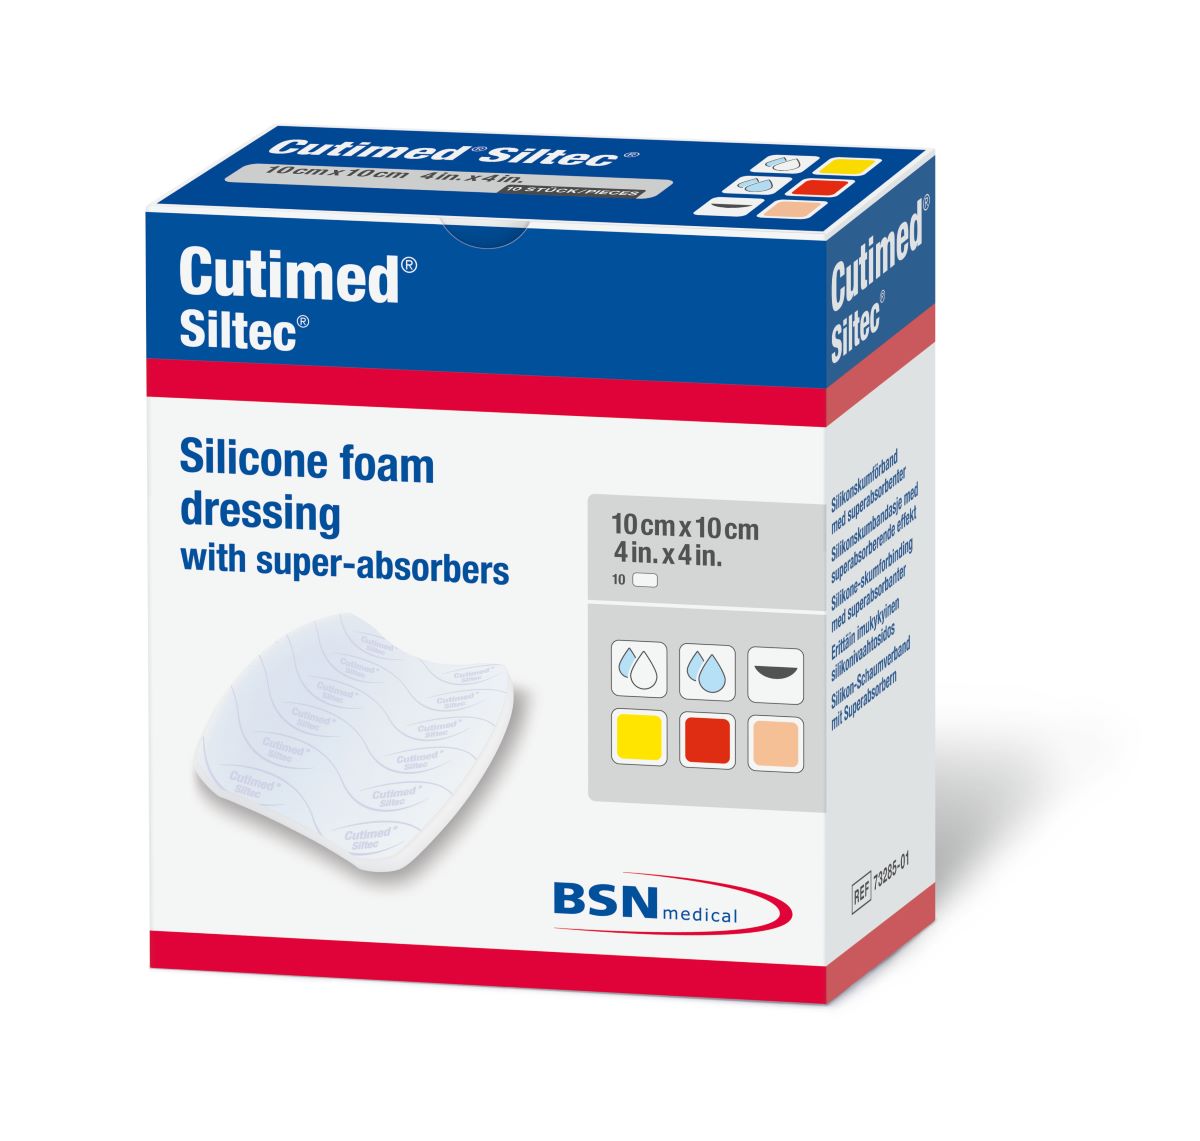 Cutimed Siltec Non-adhesive Dressing